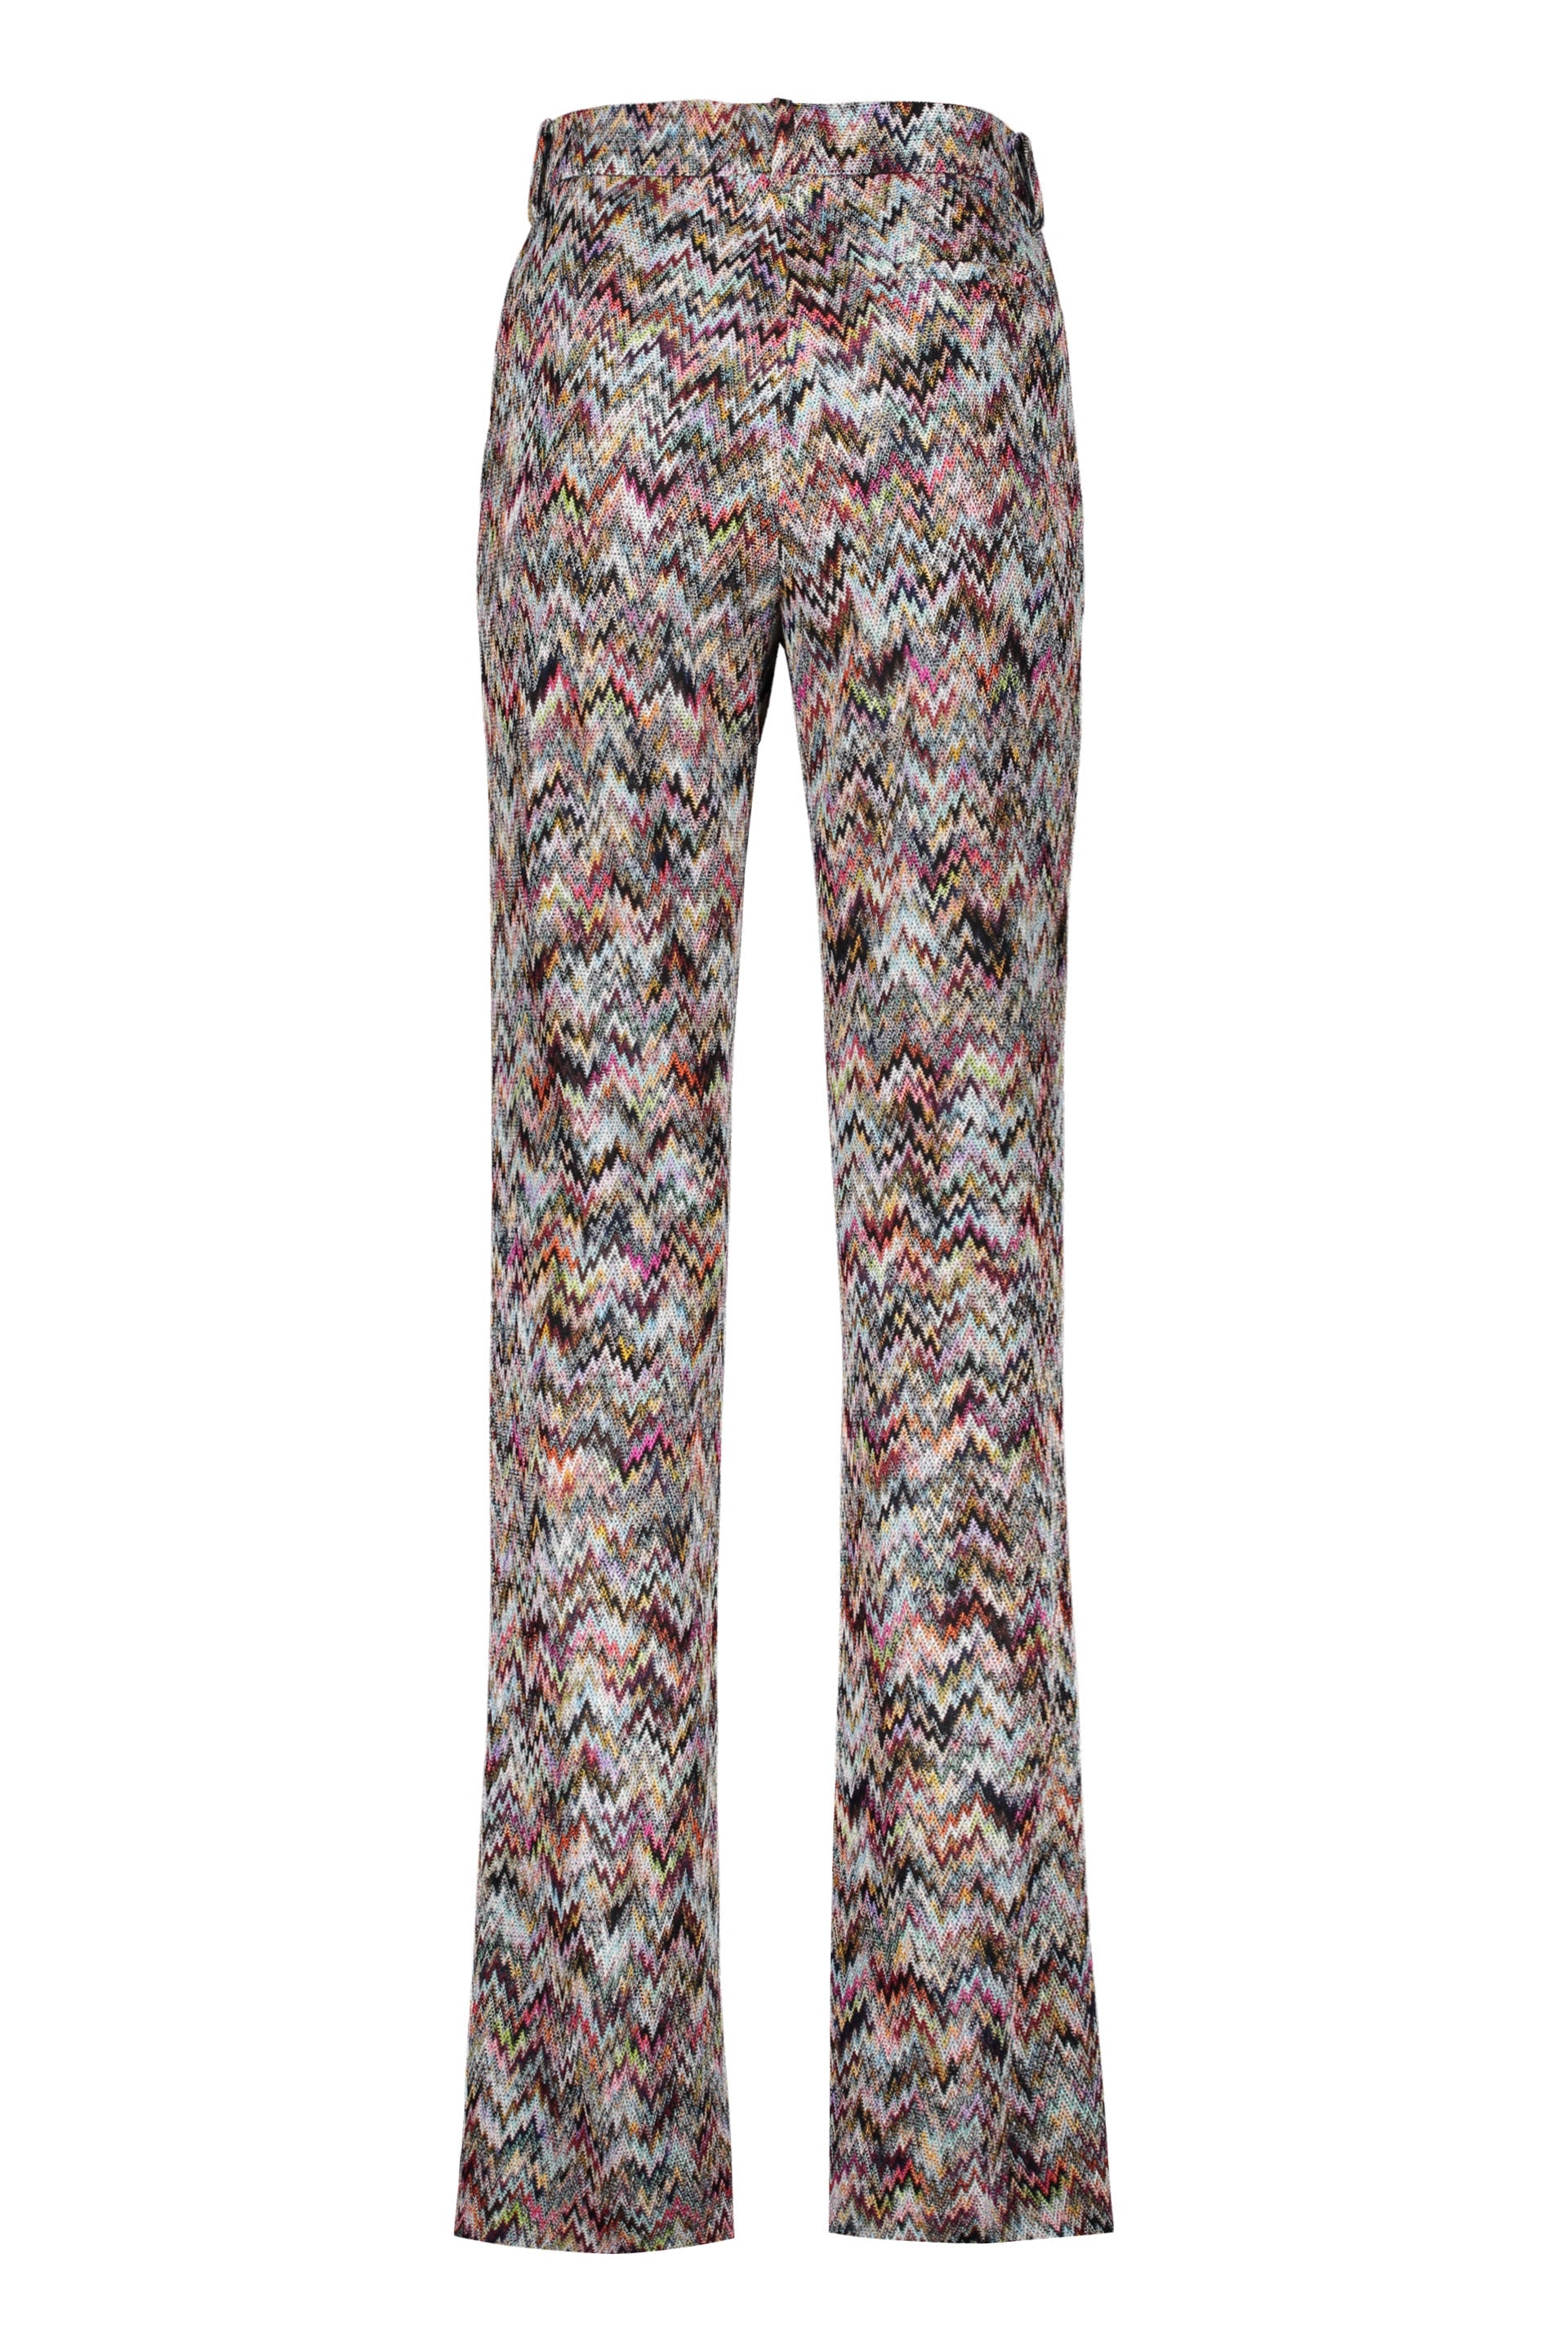 Missoni-OUTLET-SALE-Chevron-knitted-palazzo-trousers-Hosen-ARCHIVE-COLLECTION-2_79456789-e4ce-4c7c-b9f8-75135eb97ba1.jpg